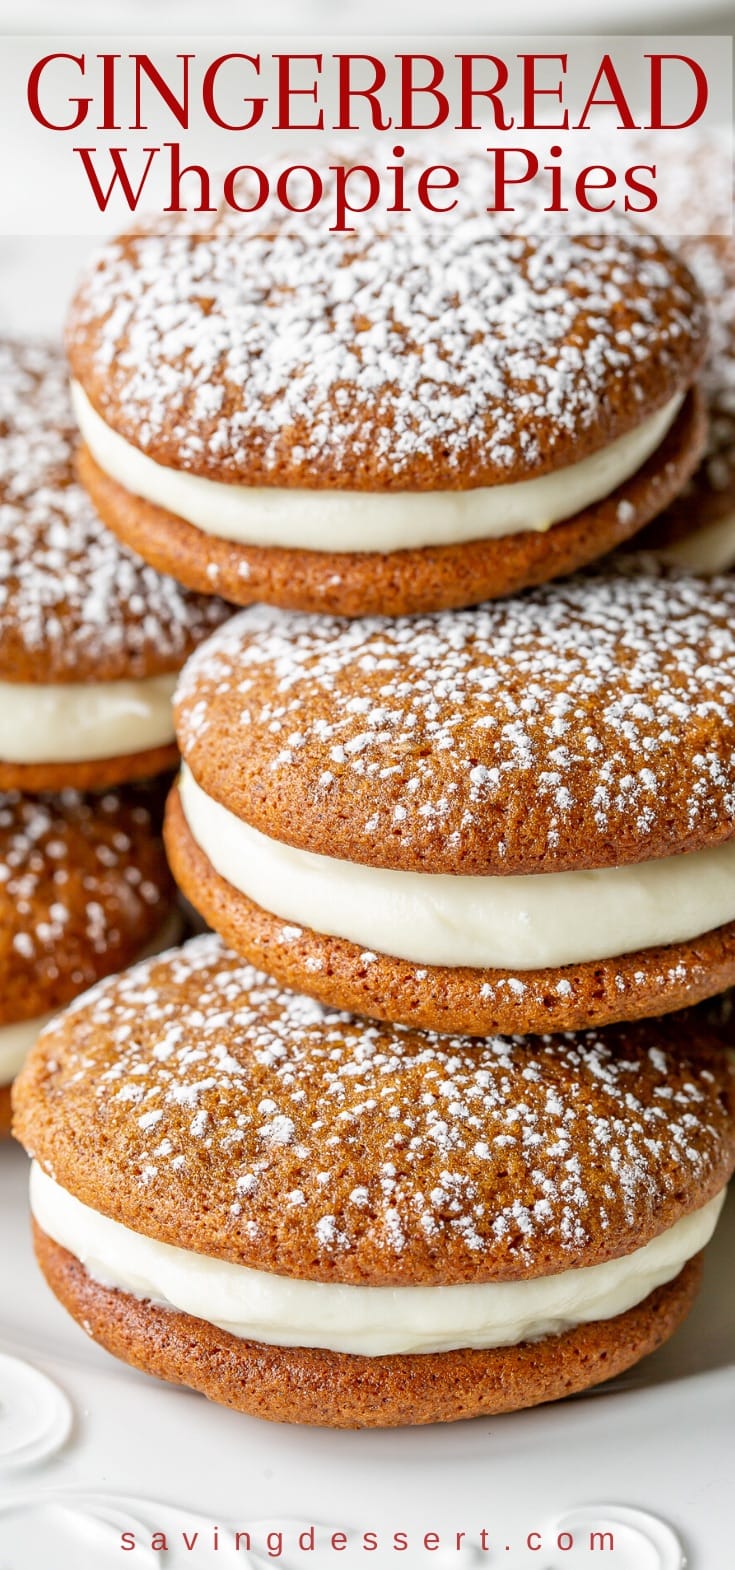 A stack of gingerbread whoopie pies with lemon cream filling